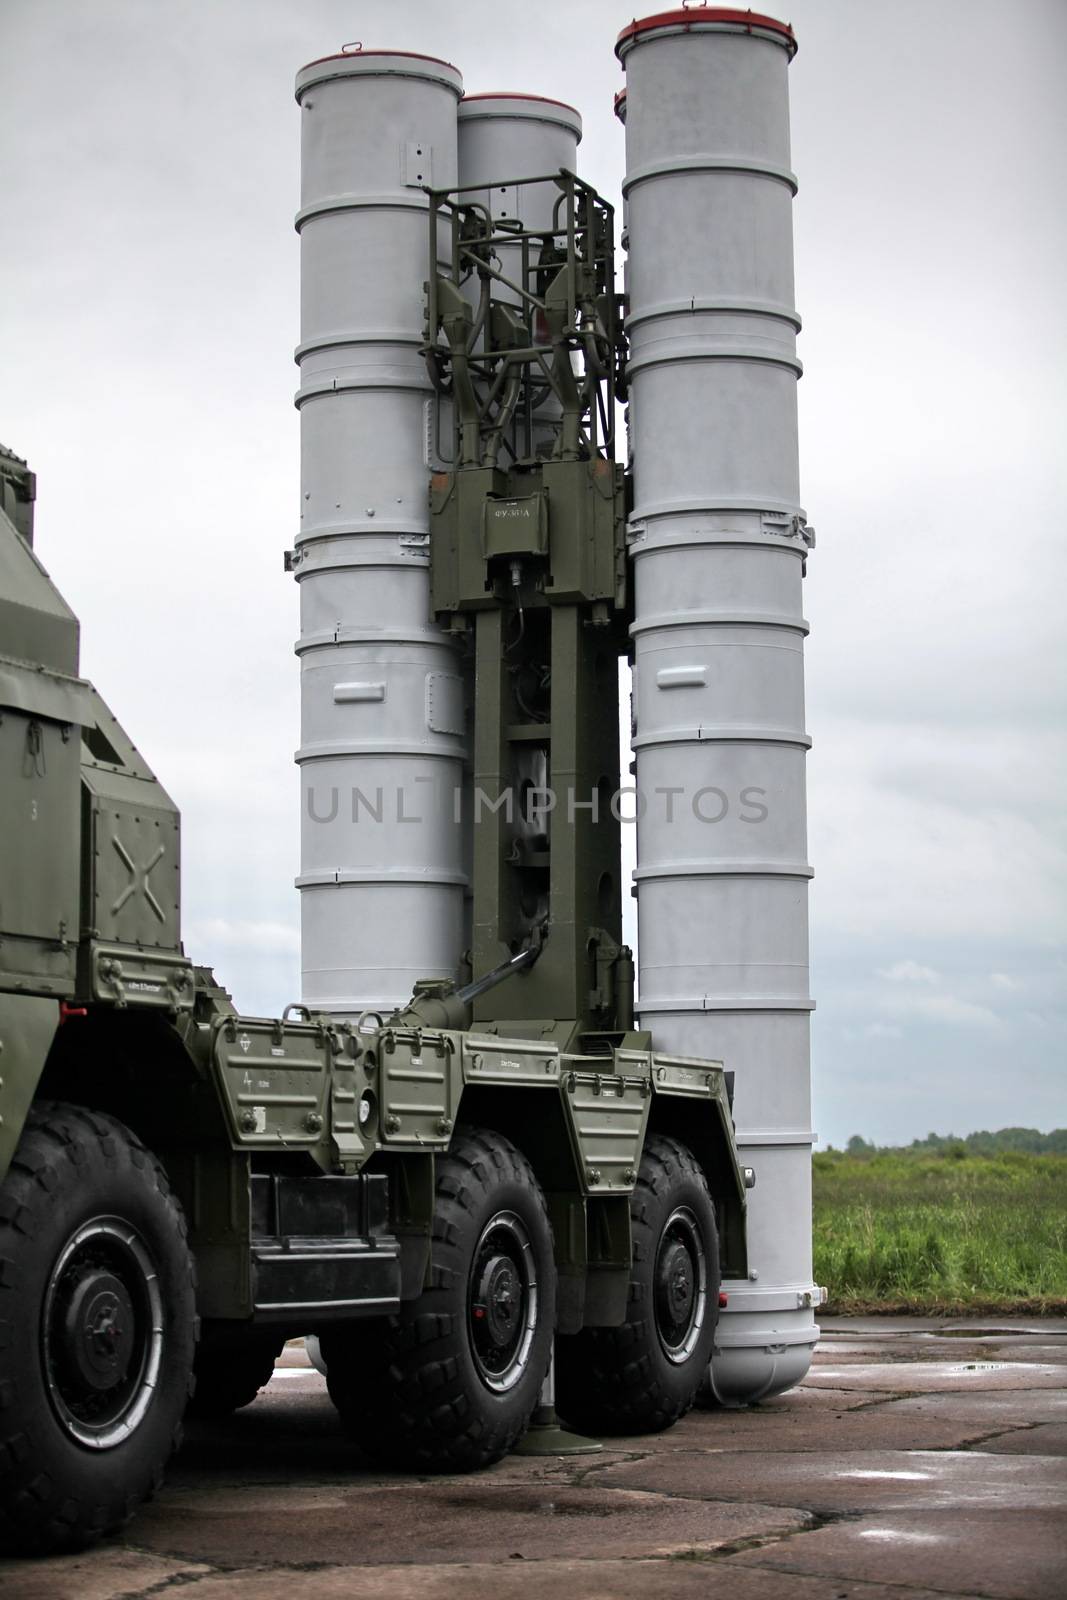 Russian mobile missile launcher on the position